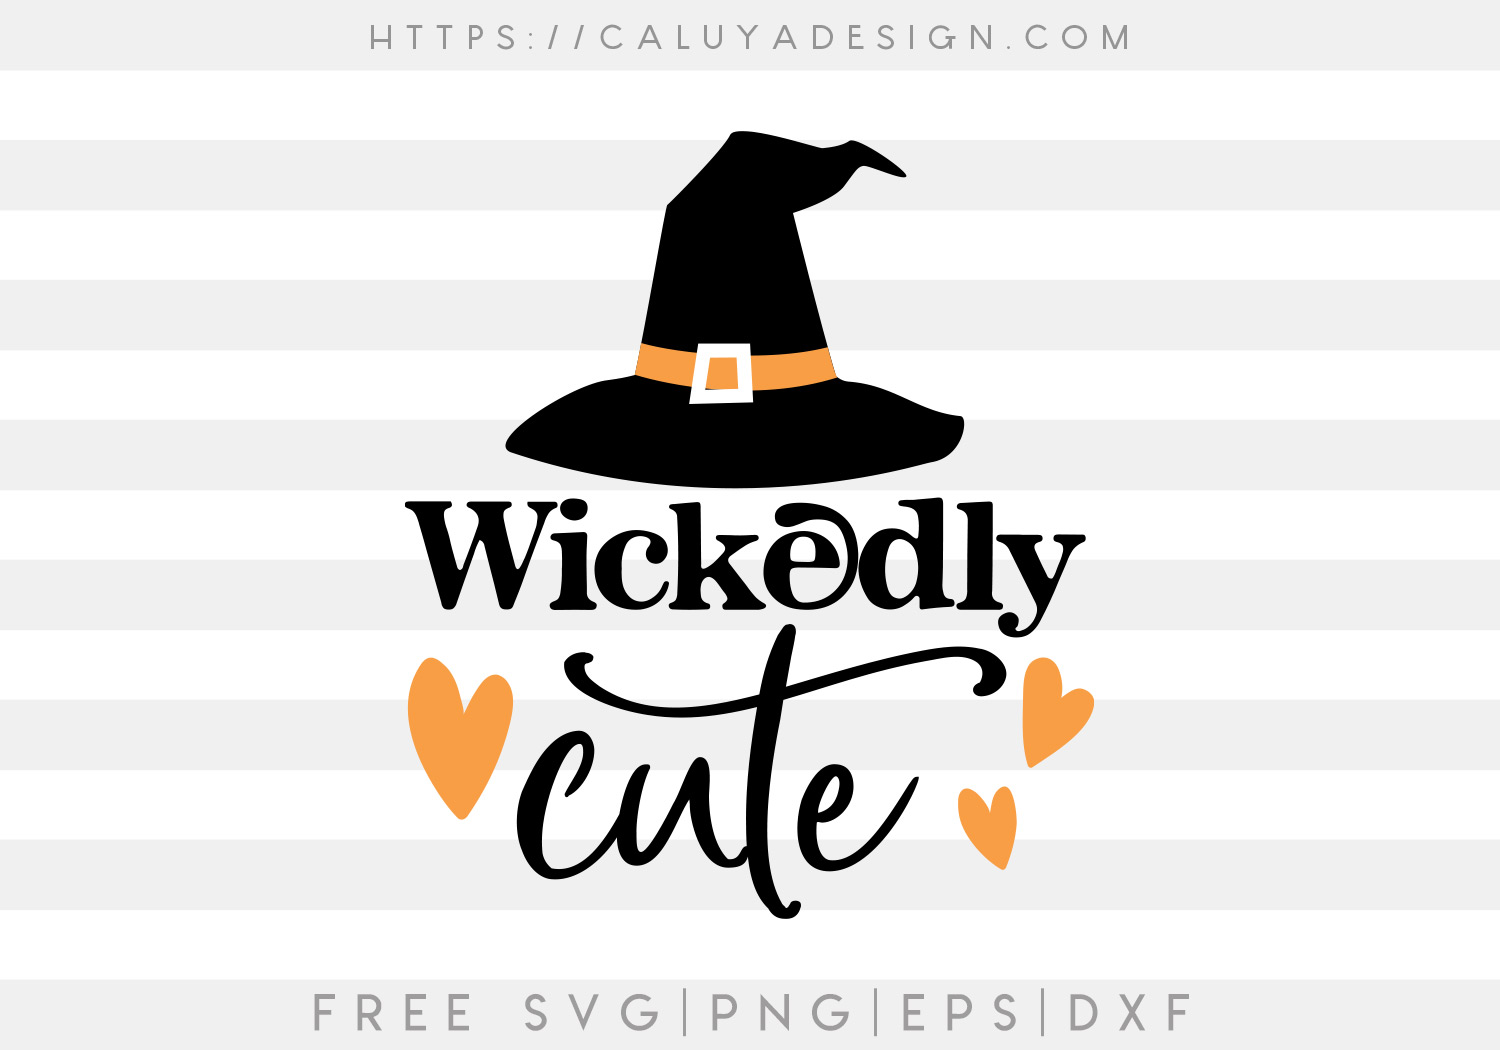 Free Wickedly Cute SVG Cut File